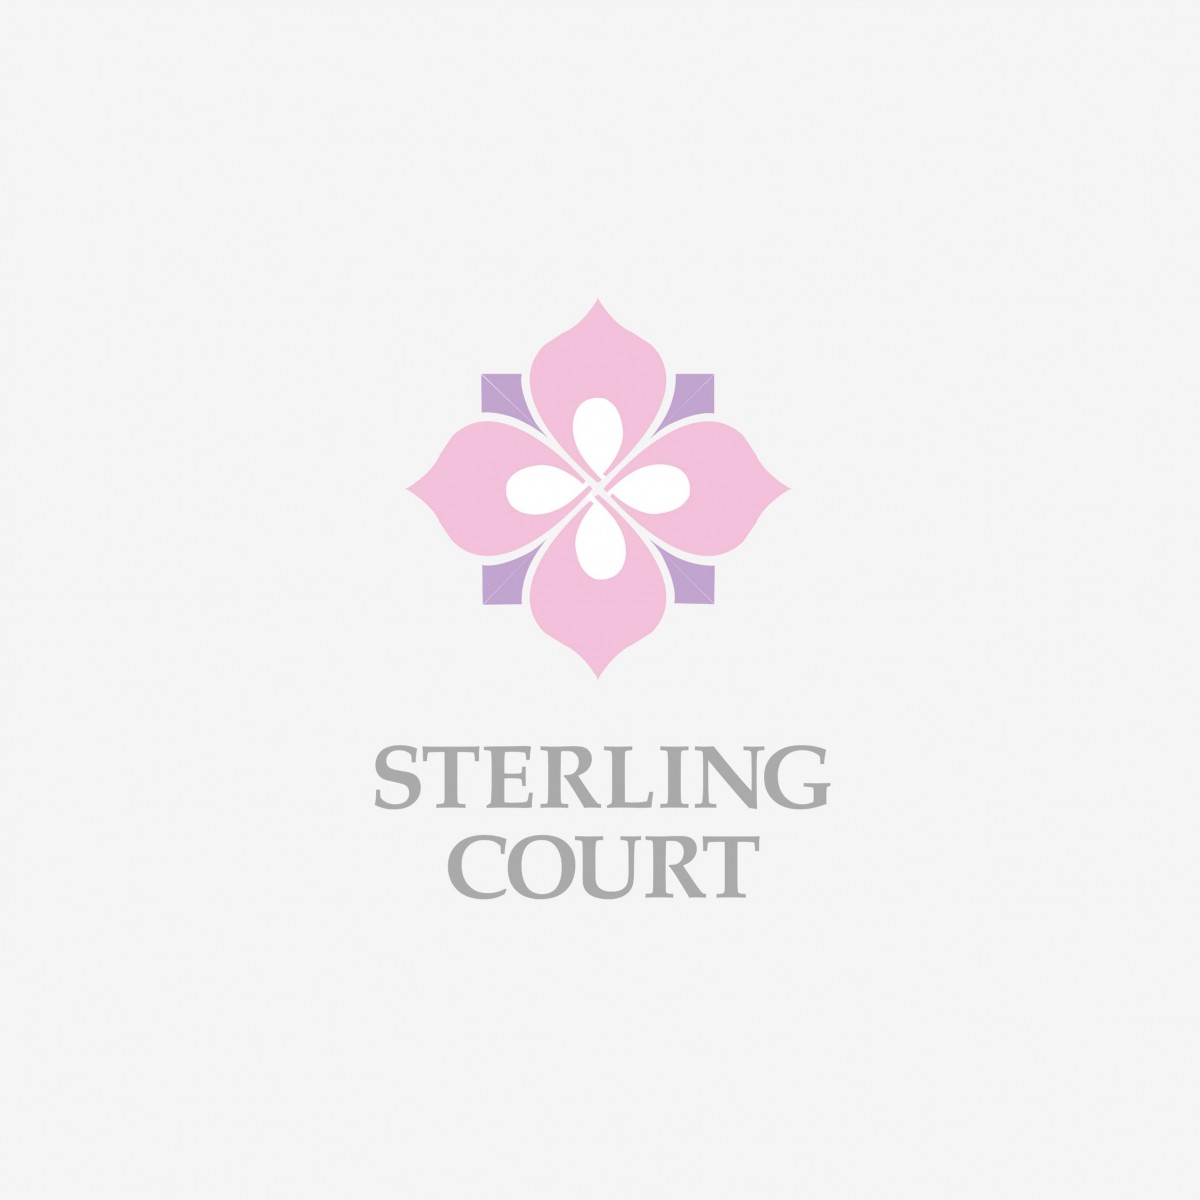 Sterling Court corporate identity